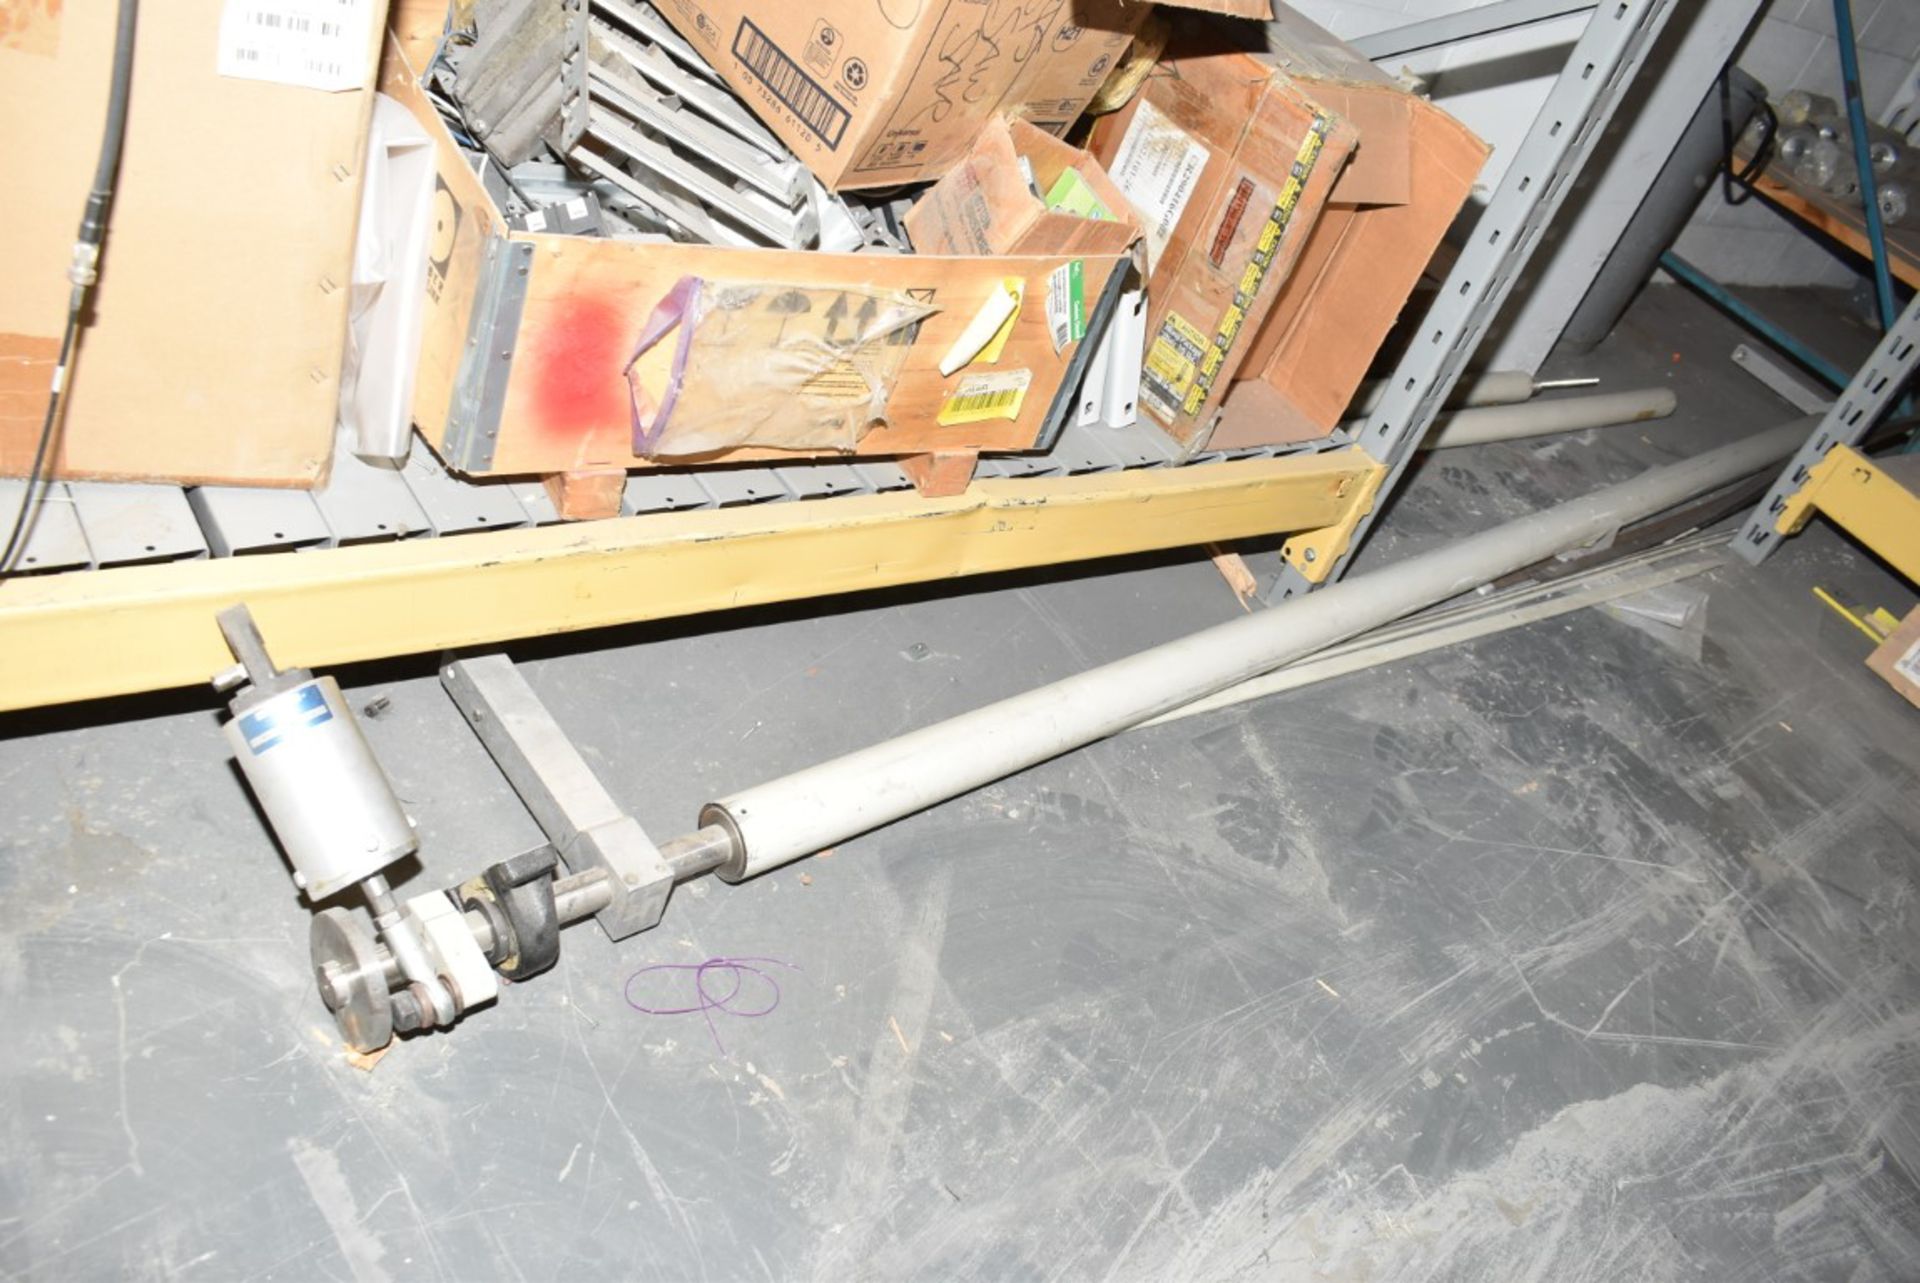 LOT/ CONTENTS OF SHELF - INCLUDING BRACKETS, HARDWARE, SPARE PARTS [RIGGING FEE FOR LOT #1796 - $ - Image 4 of 4